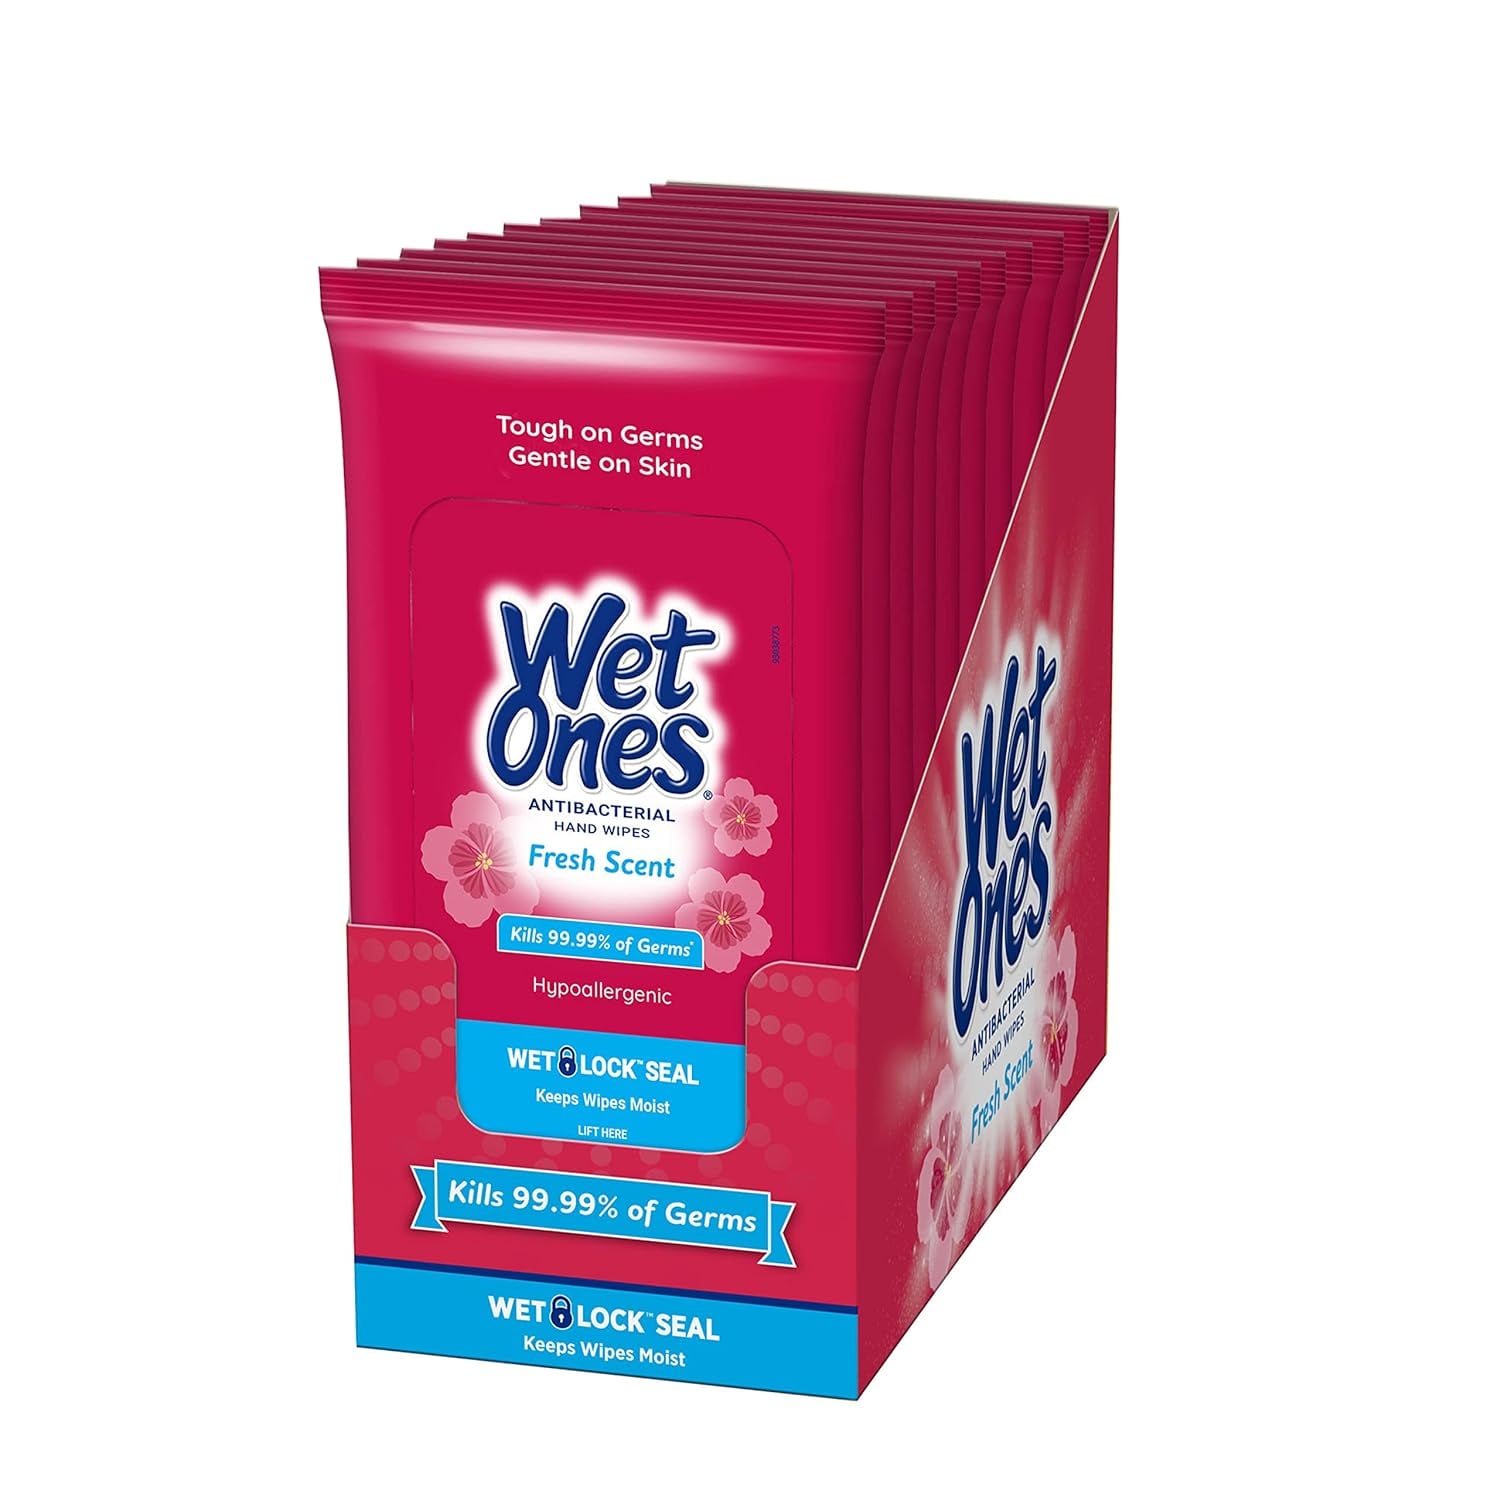 <p><a href="https://www.amazon.com/Wet-Ones-Antibacterial-Wipes-Count/dp/B01KJA4WHW">BUY NOW</a></p><p>$20</p><p><a href="https://www.amazon.com/Wet-Ones-Antibacterial-Wipes-Count/dp/B01KJA4WHW" class="ga-track"><strong>Wet Ones Antibacterial Hand Wipes</strong></a> ($20, originally $23) </p><p>Each of these antibacterial wipe packs comes with 20 wipes, and they're compact enough to slip into your personal item with ease. They're super convenient because you can use them to clean your hands and surfaces, like the tray table on the plane.</p>